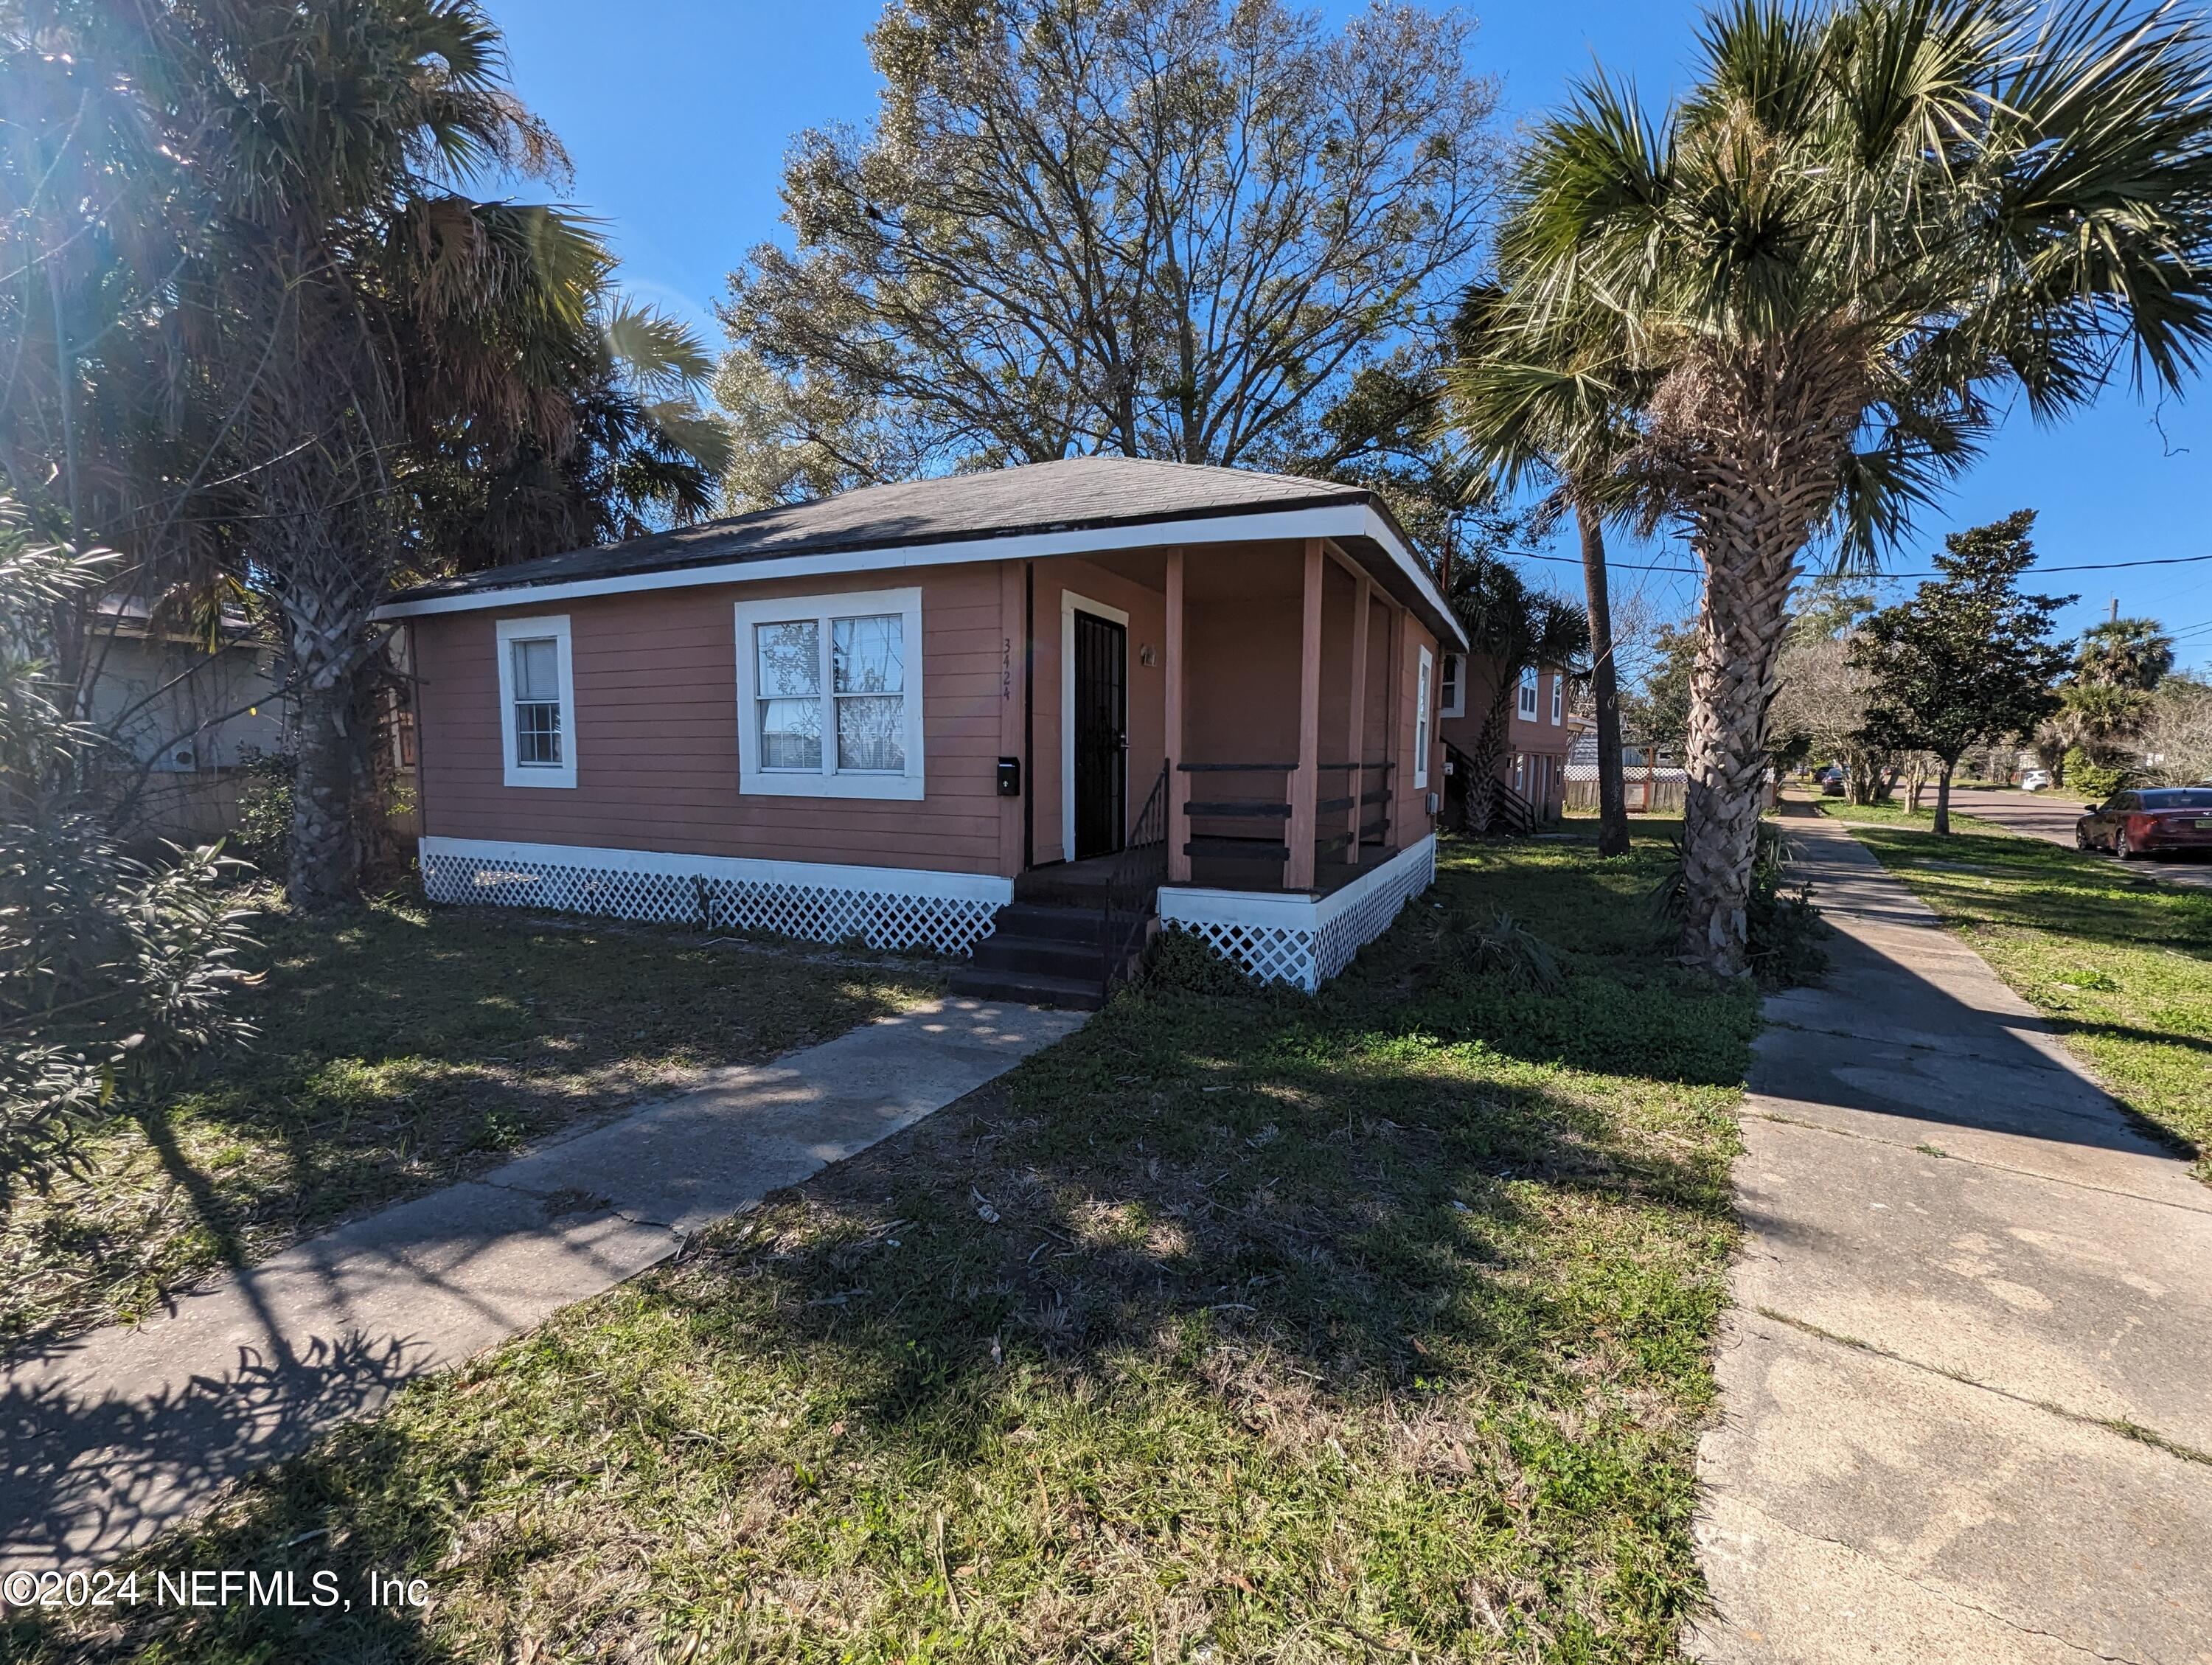 Jacksonville, FL home for sale located at 3424 TALLEYRAND Avenue, Jacksonville, FL 32206